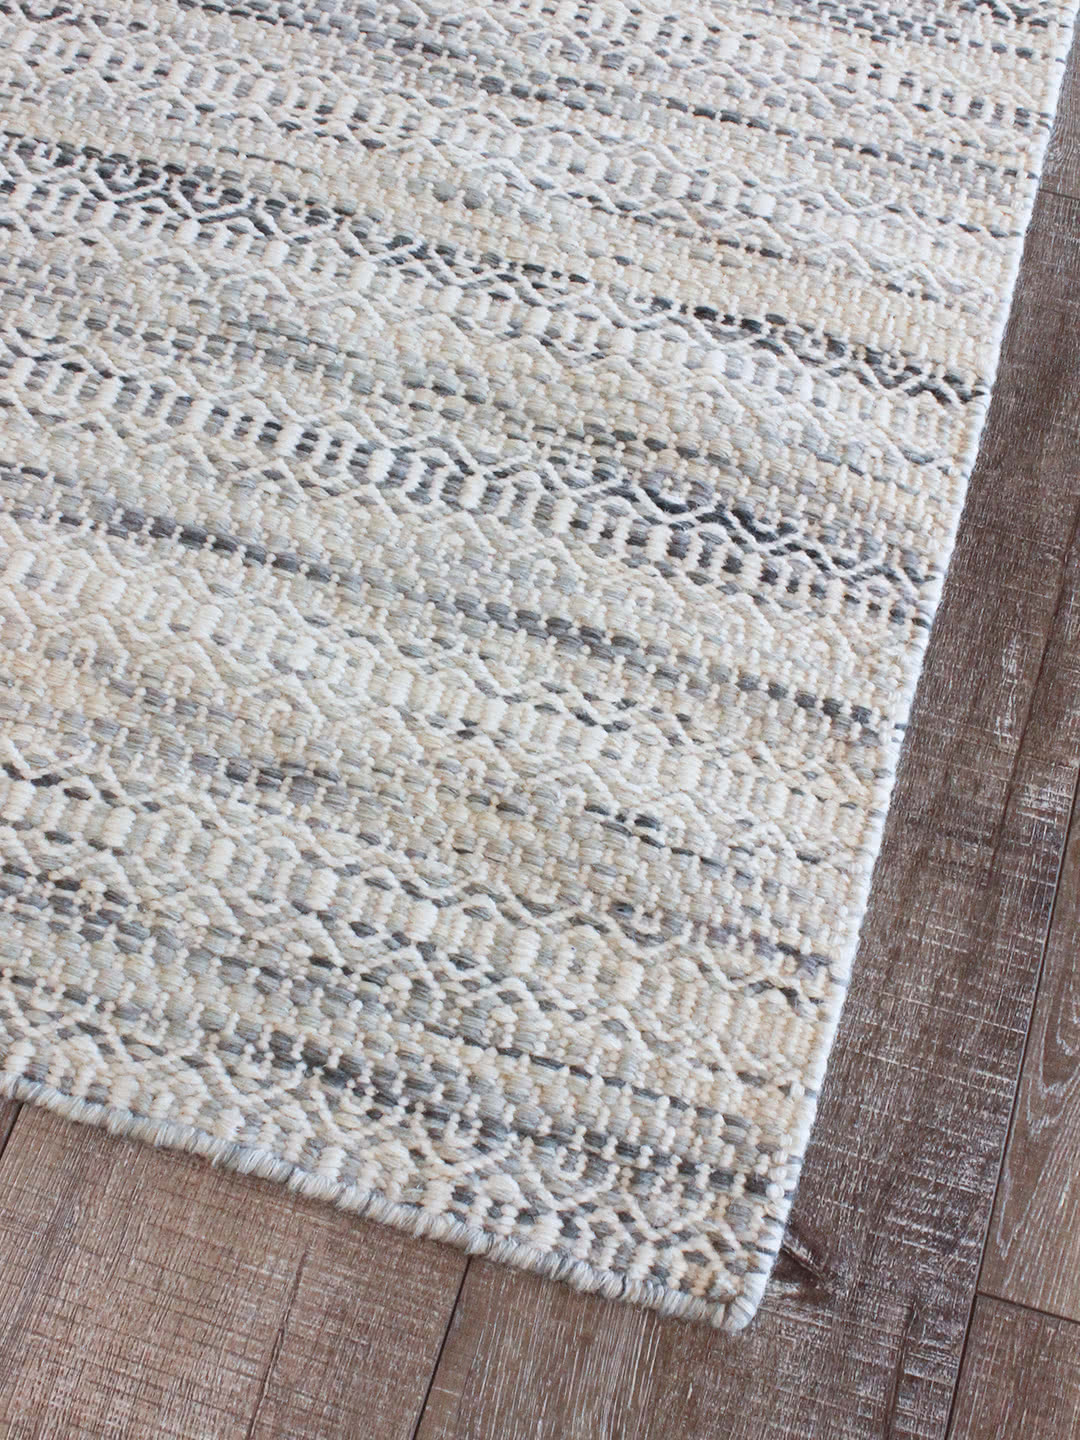 Braid Tempest Tusk Silver Ivory Rug 20% off from the Rug Collection Stockist Make Your House A Home, Furniture Store Bendigo. Free Australia Wide Delivery